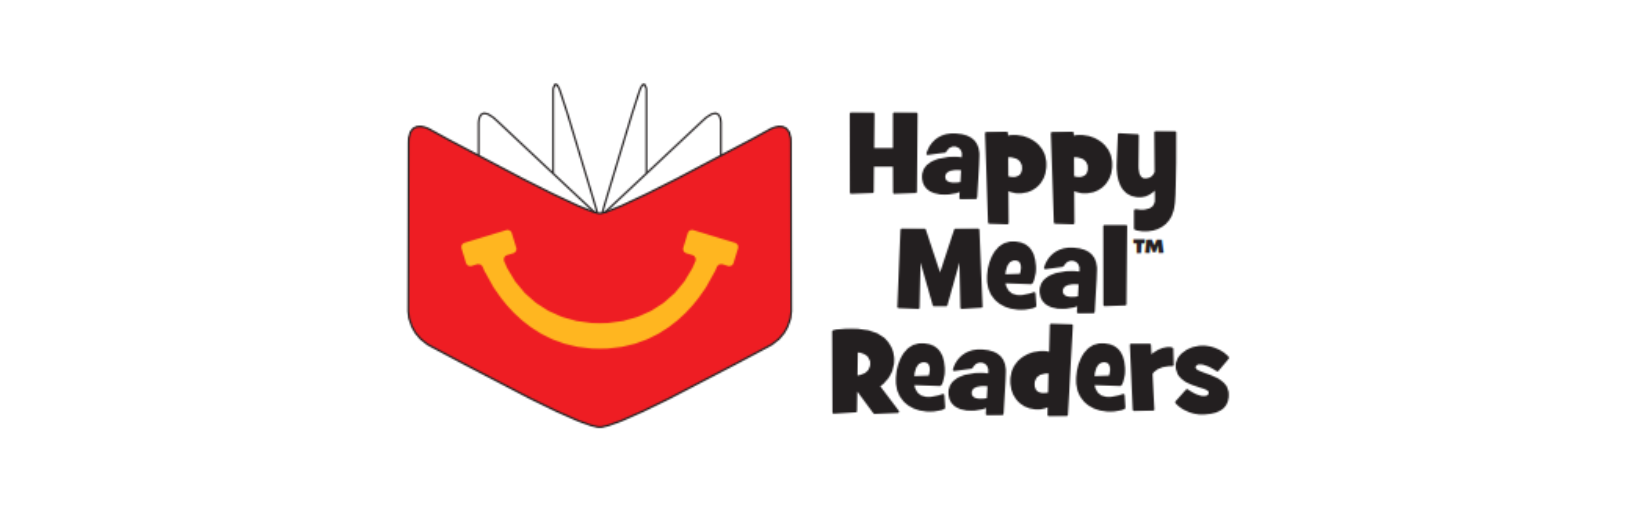 McDonald’s® Singapore Shapes New Family Experience and Passion for Reading with Happy Meal